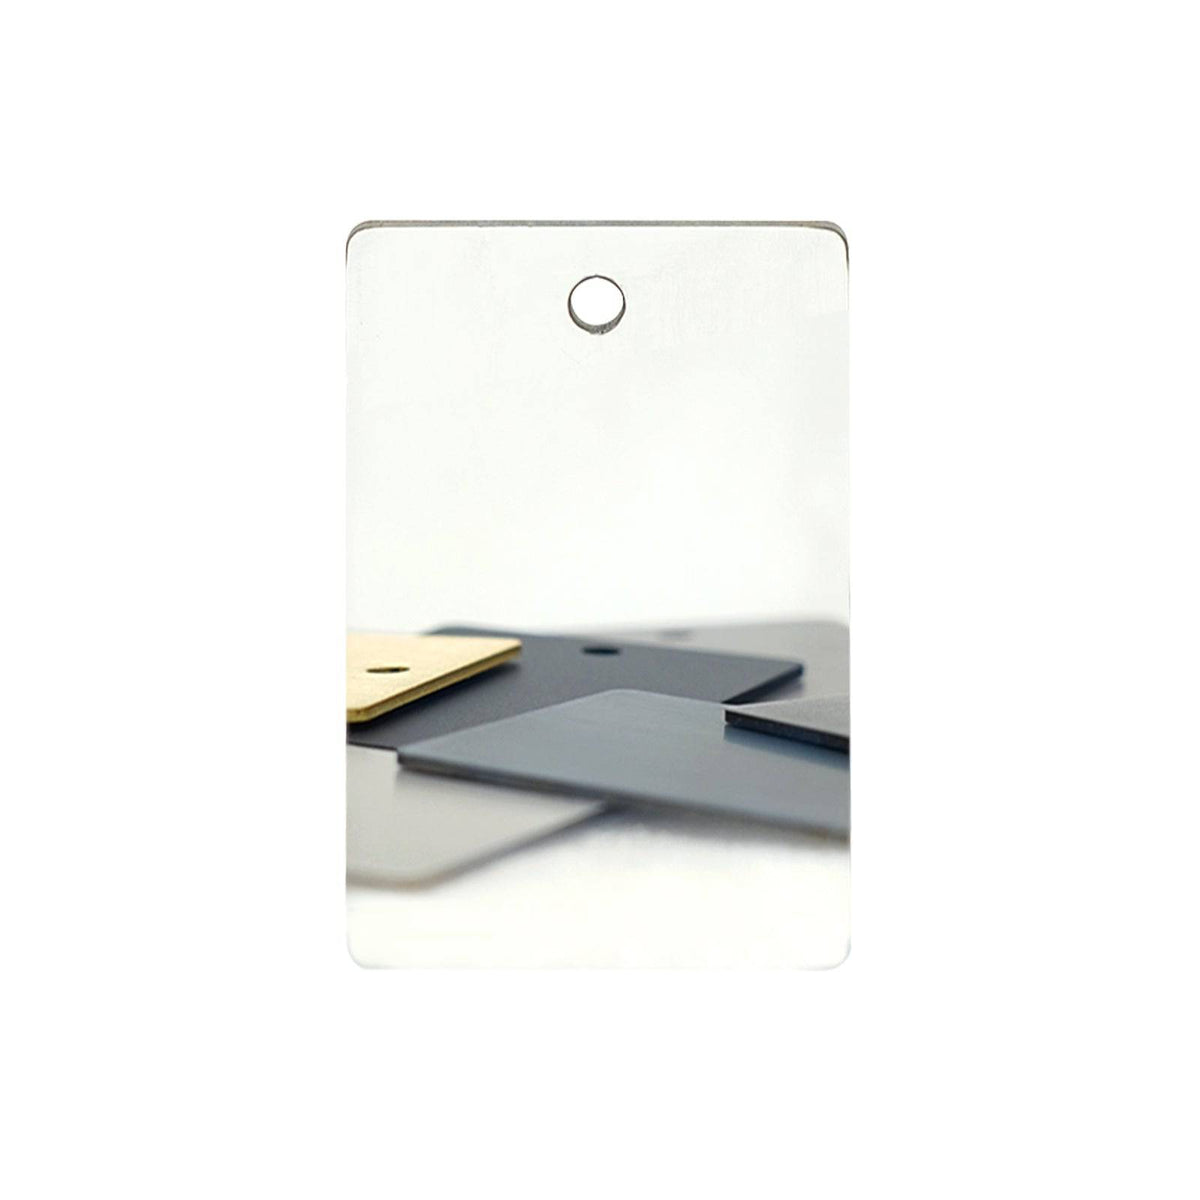 Fobest Polished Stainless Steel Sample (Mirror Finish) - -Fobest Appliance